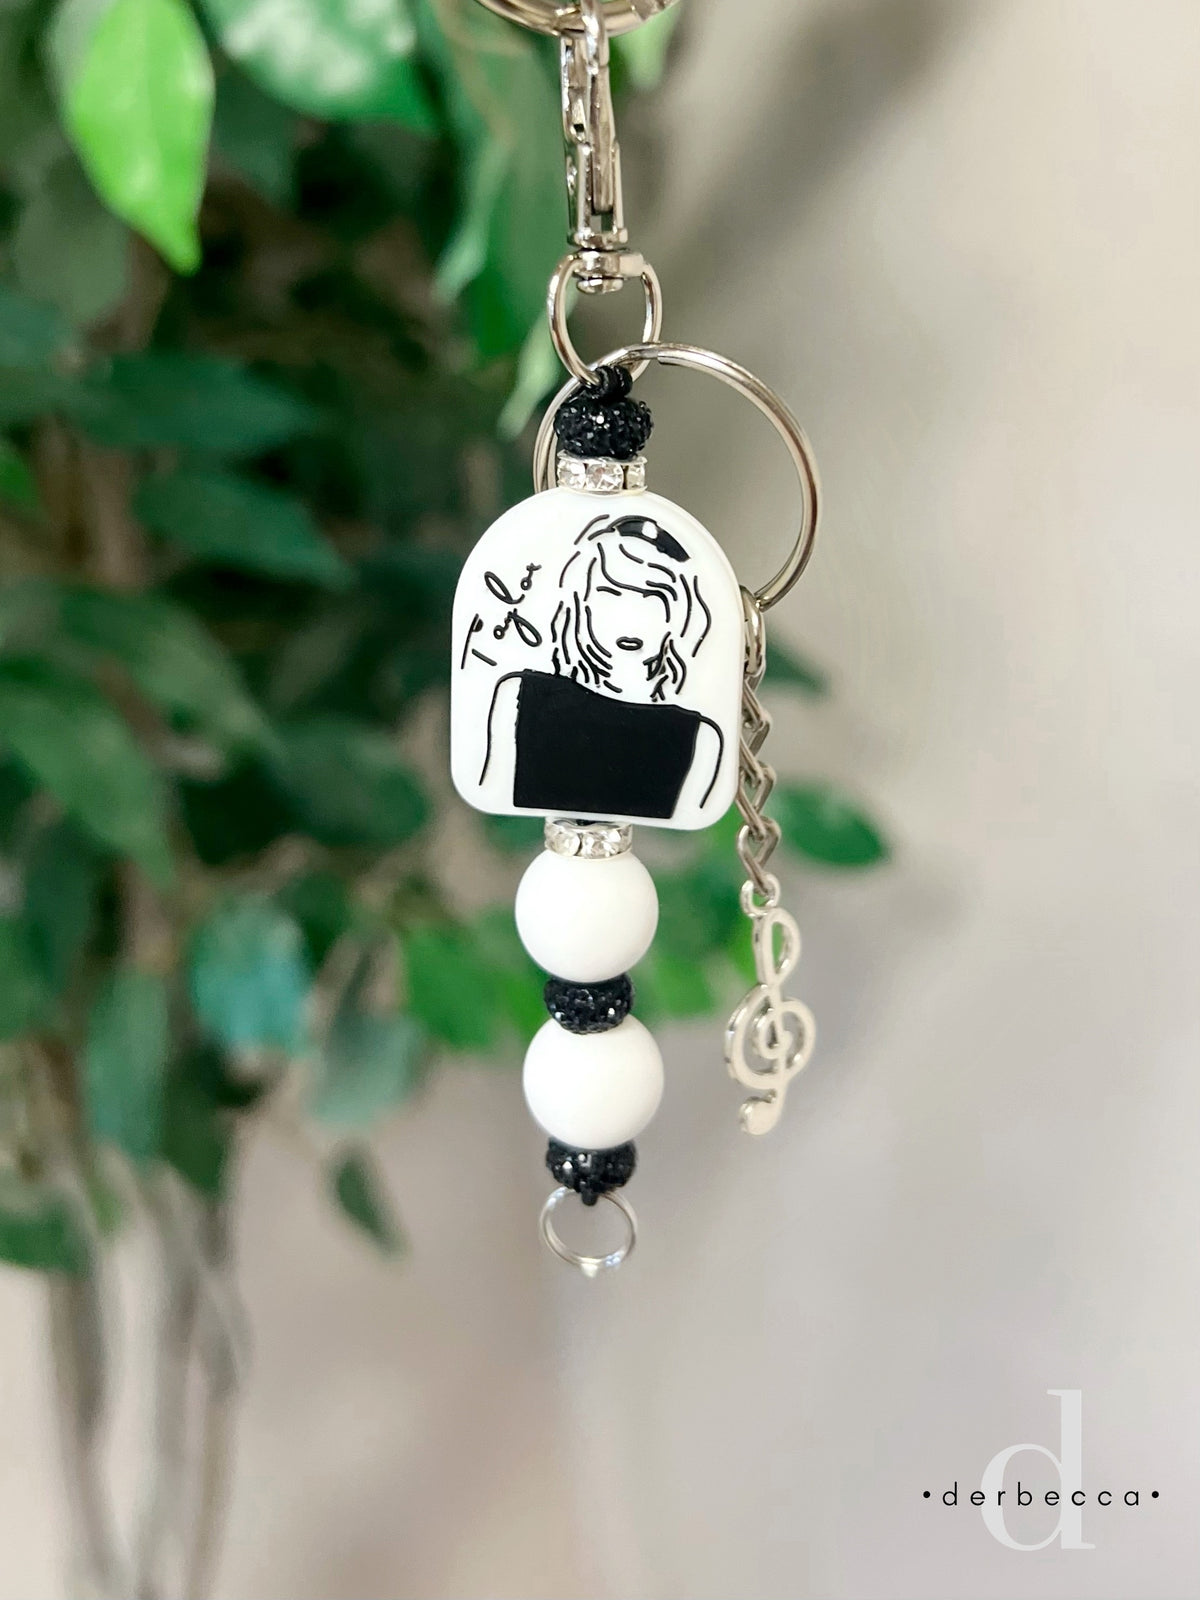 Music Lover Keychain Taylor Swift Tween Gift Clip On Accessory for Purse or Bookbag Backpack